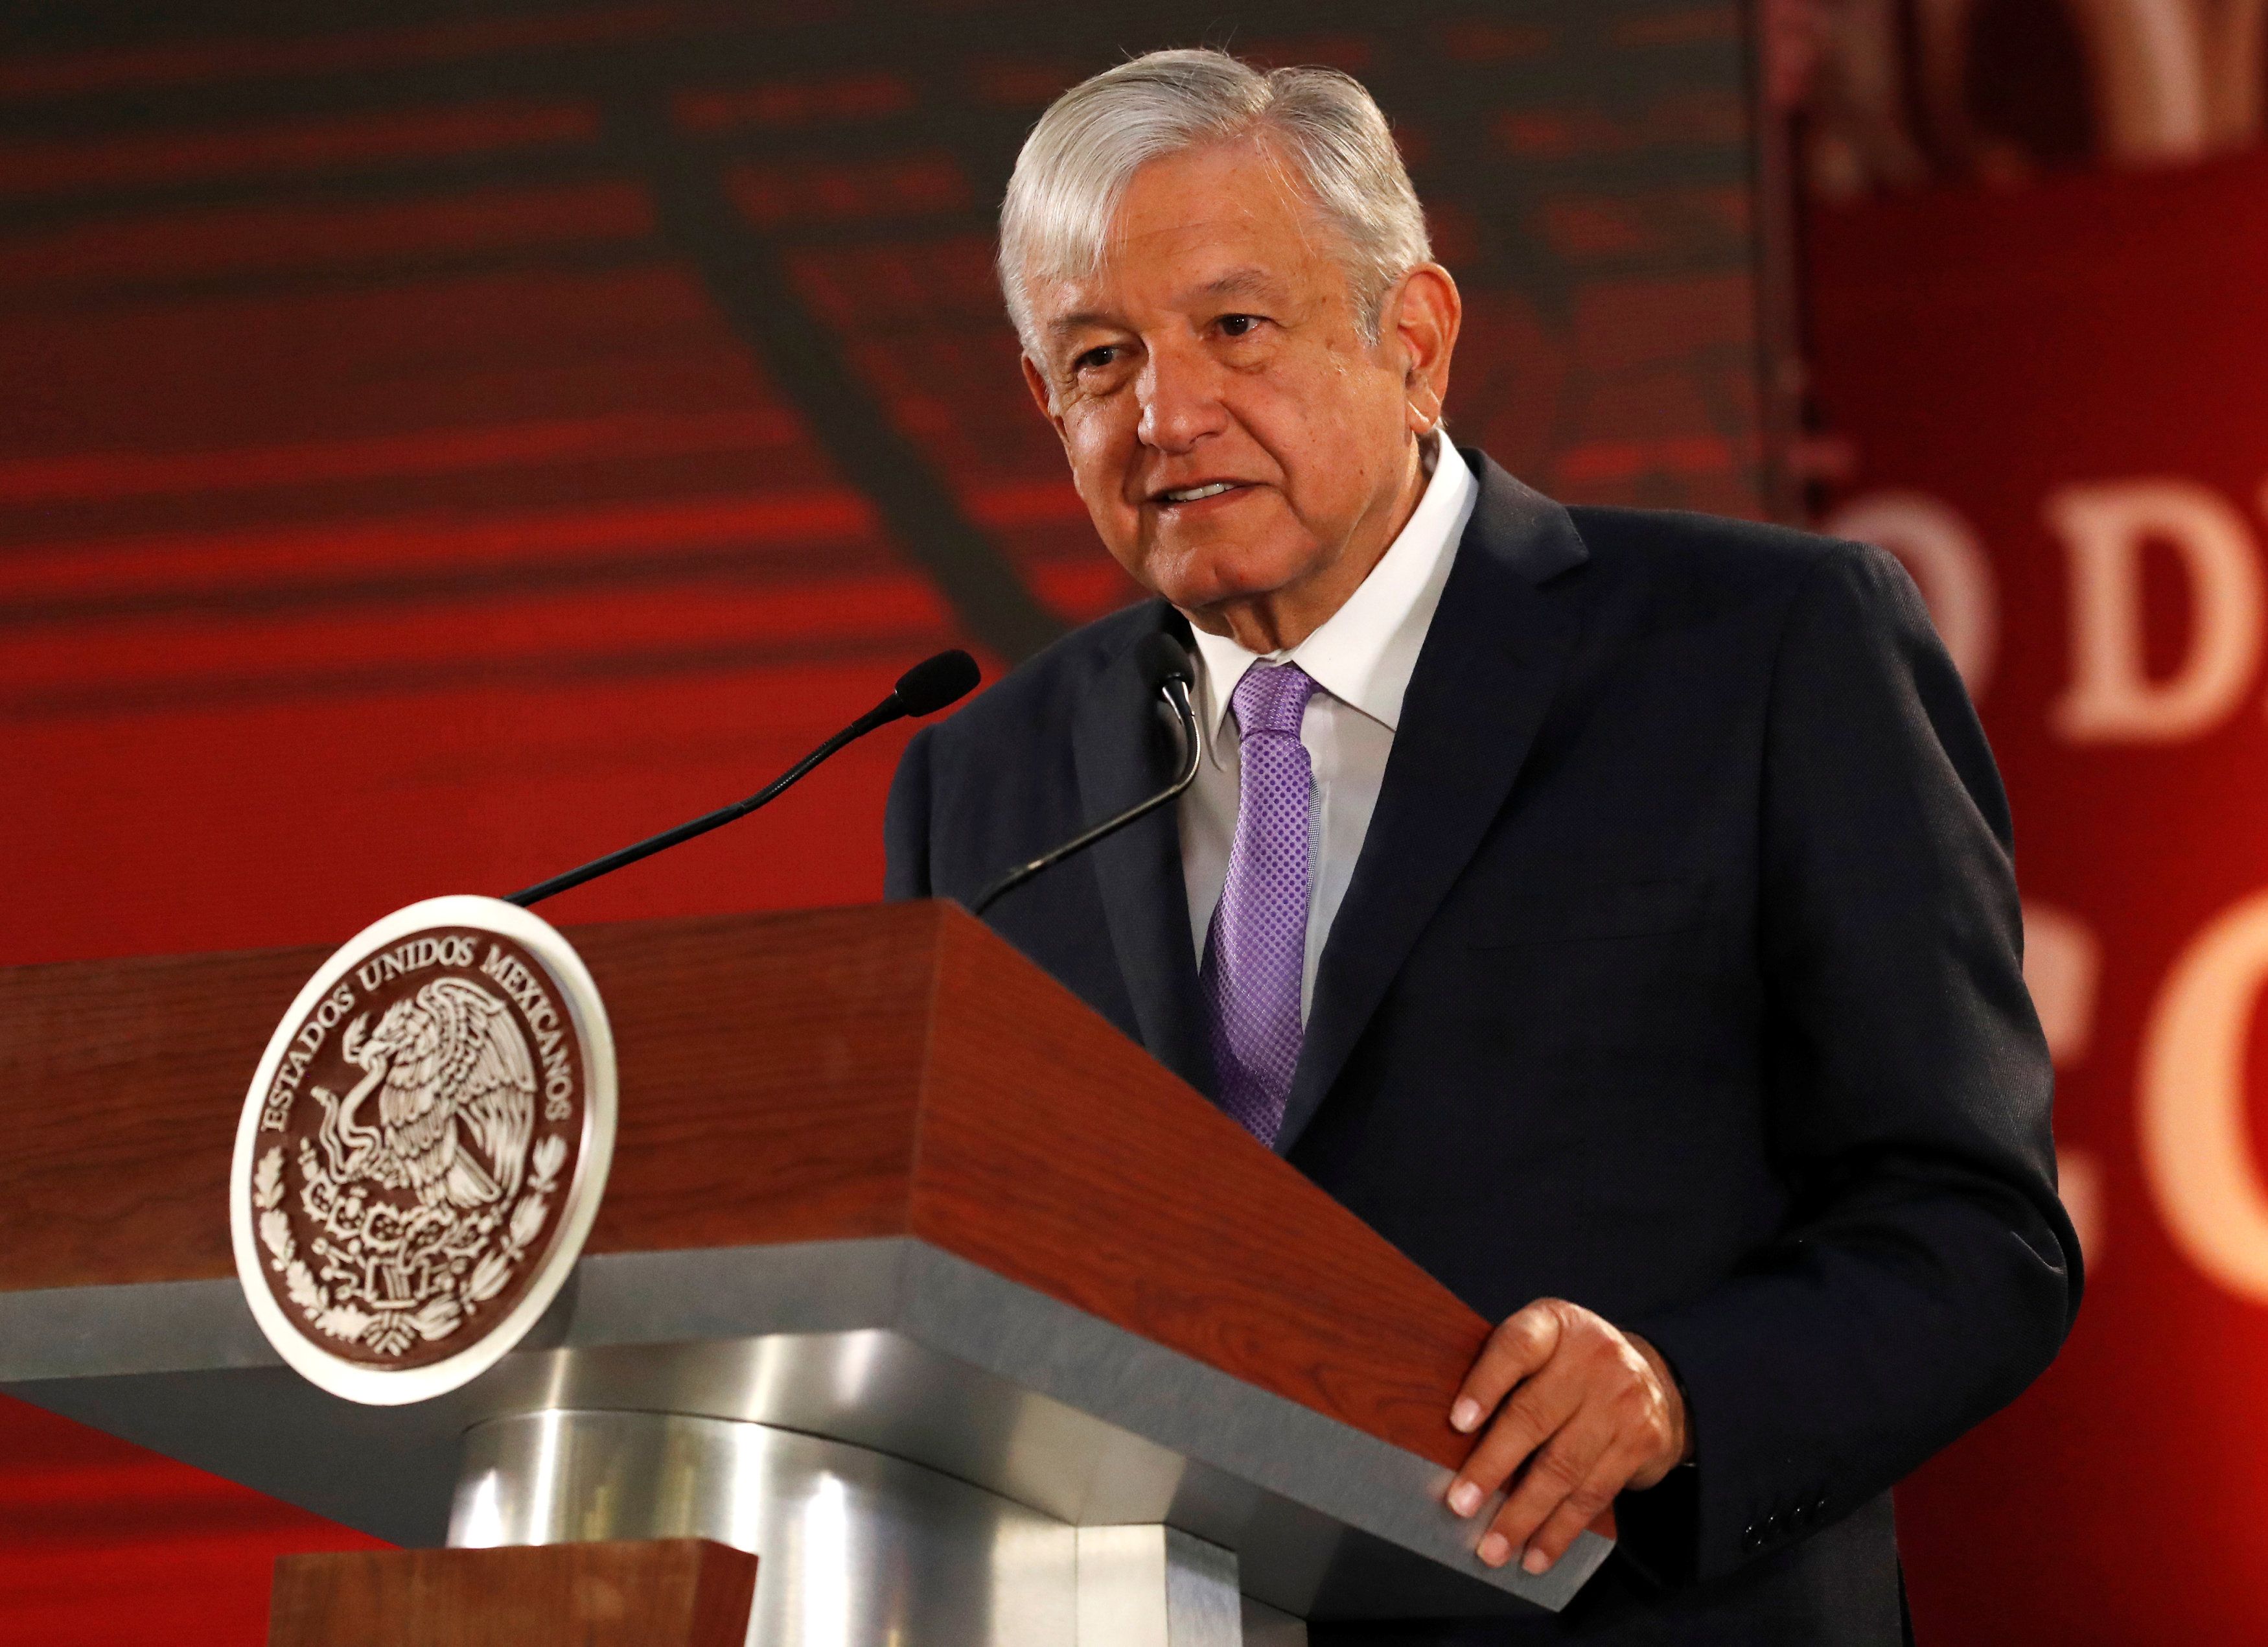 Mexico is Ready to Serve as Mediator for Peace in Venezuela